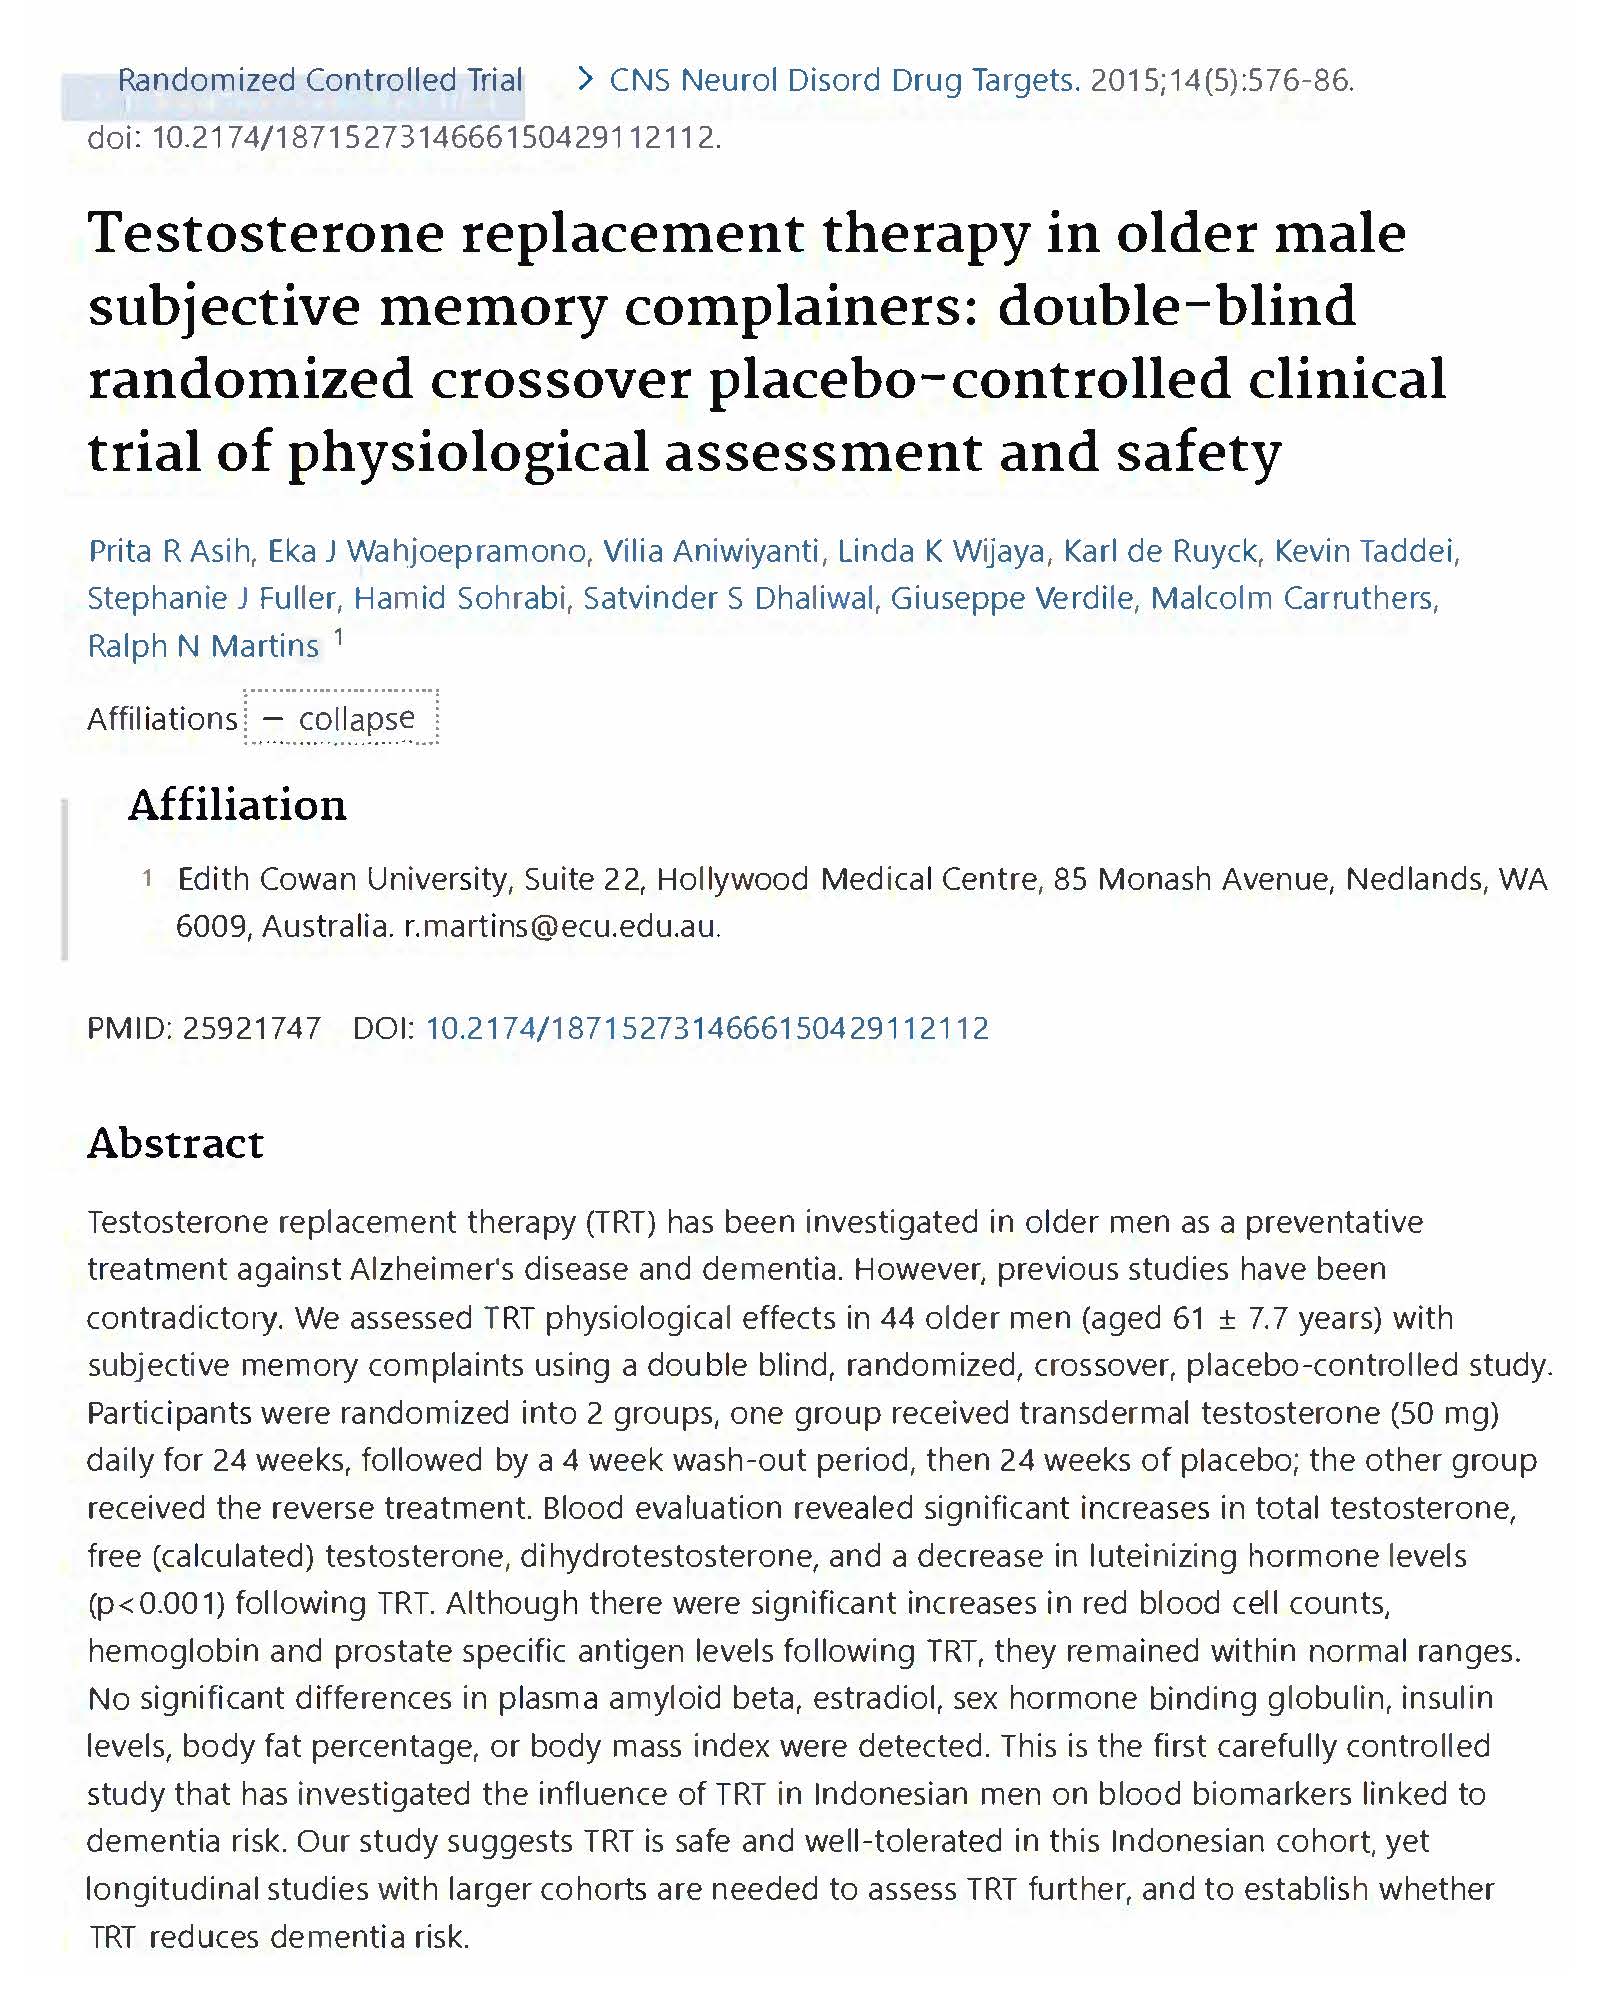 Testosterone replacement therapy in older male subjective memory complainers: double-blind randomized crossover placebo-controlled clinical trial of physiological assessment and safety